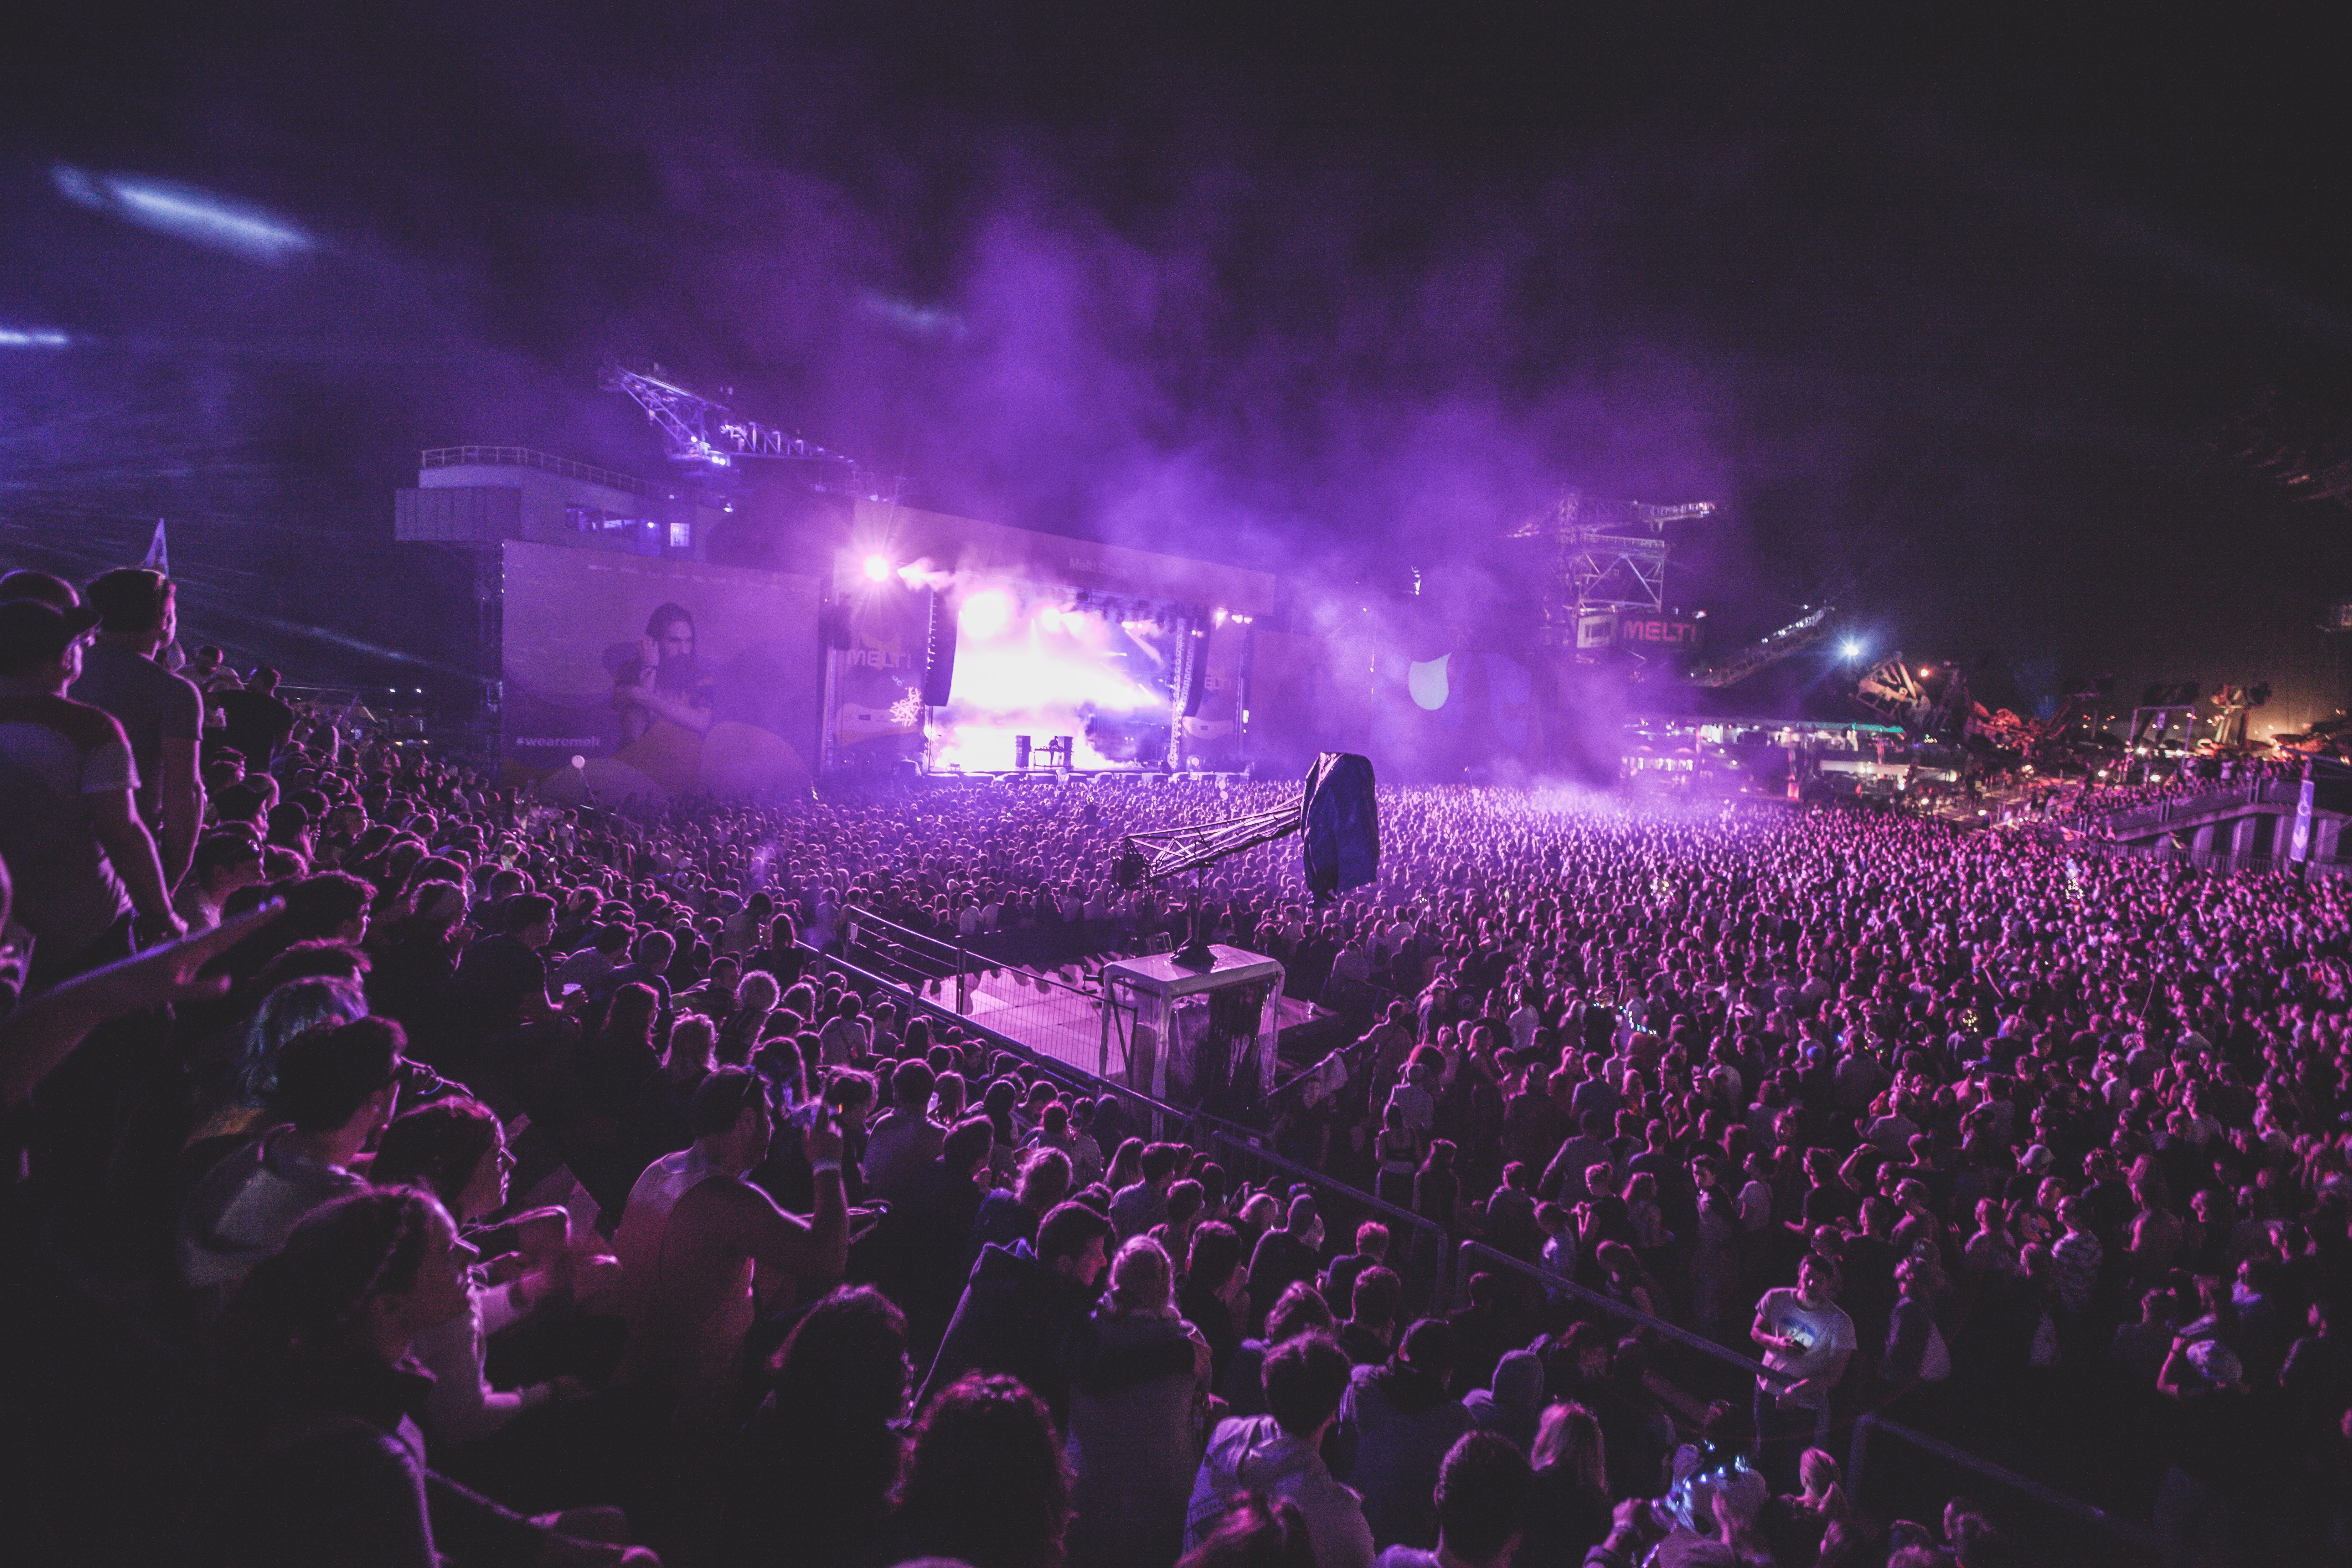 group of people in a concert with smoke and purple light